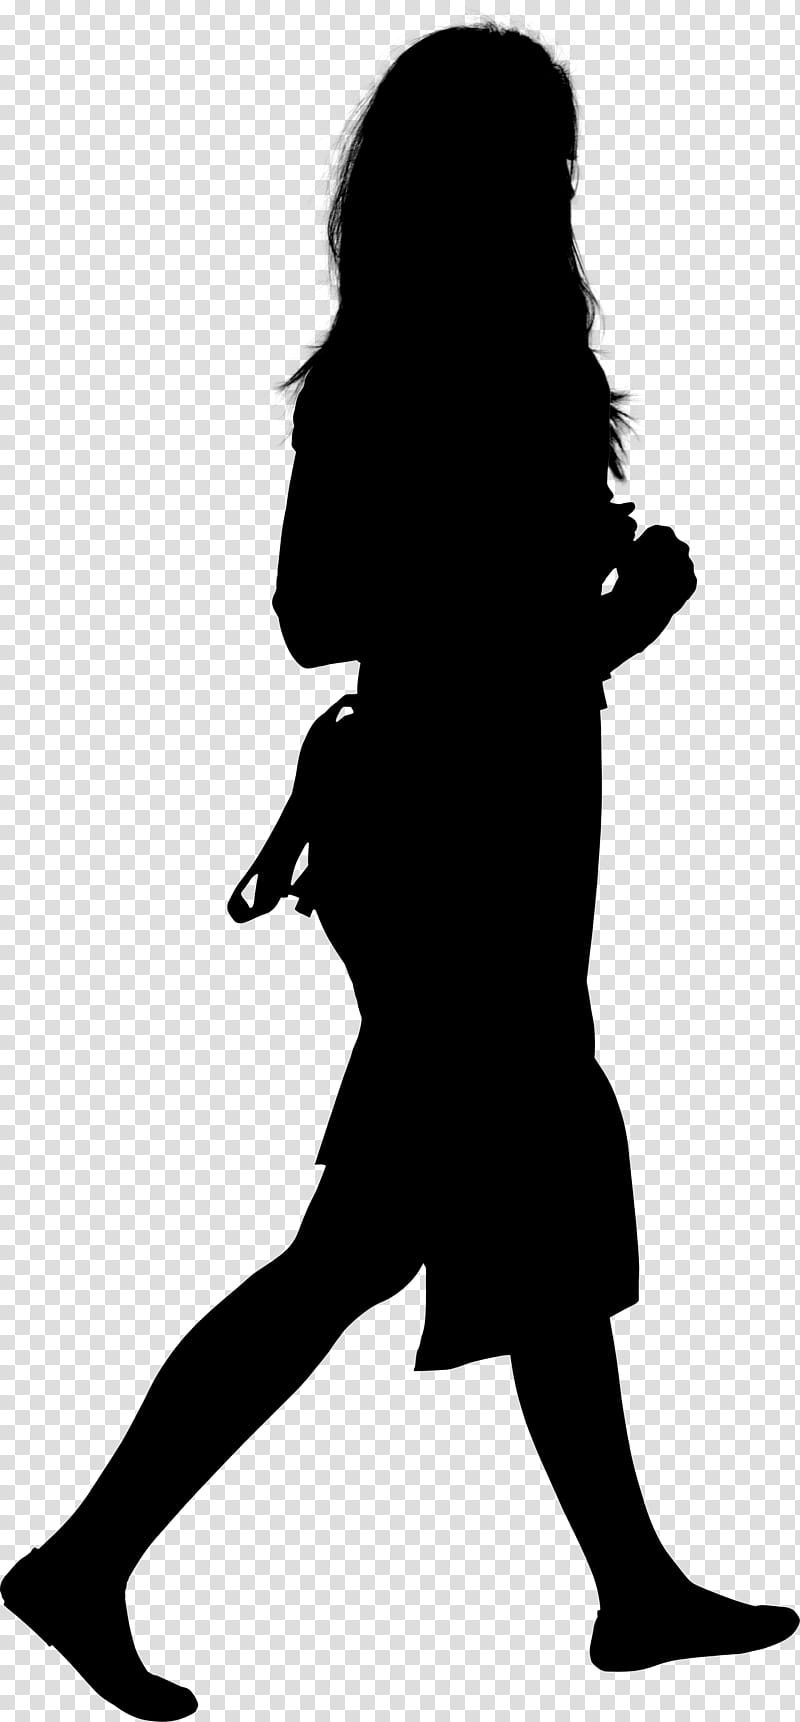 Human Silhouette Human Figure Human Body Standing Blackandwhite Transparent Background Png Clipart Hiclipart